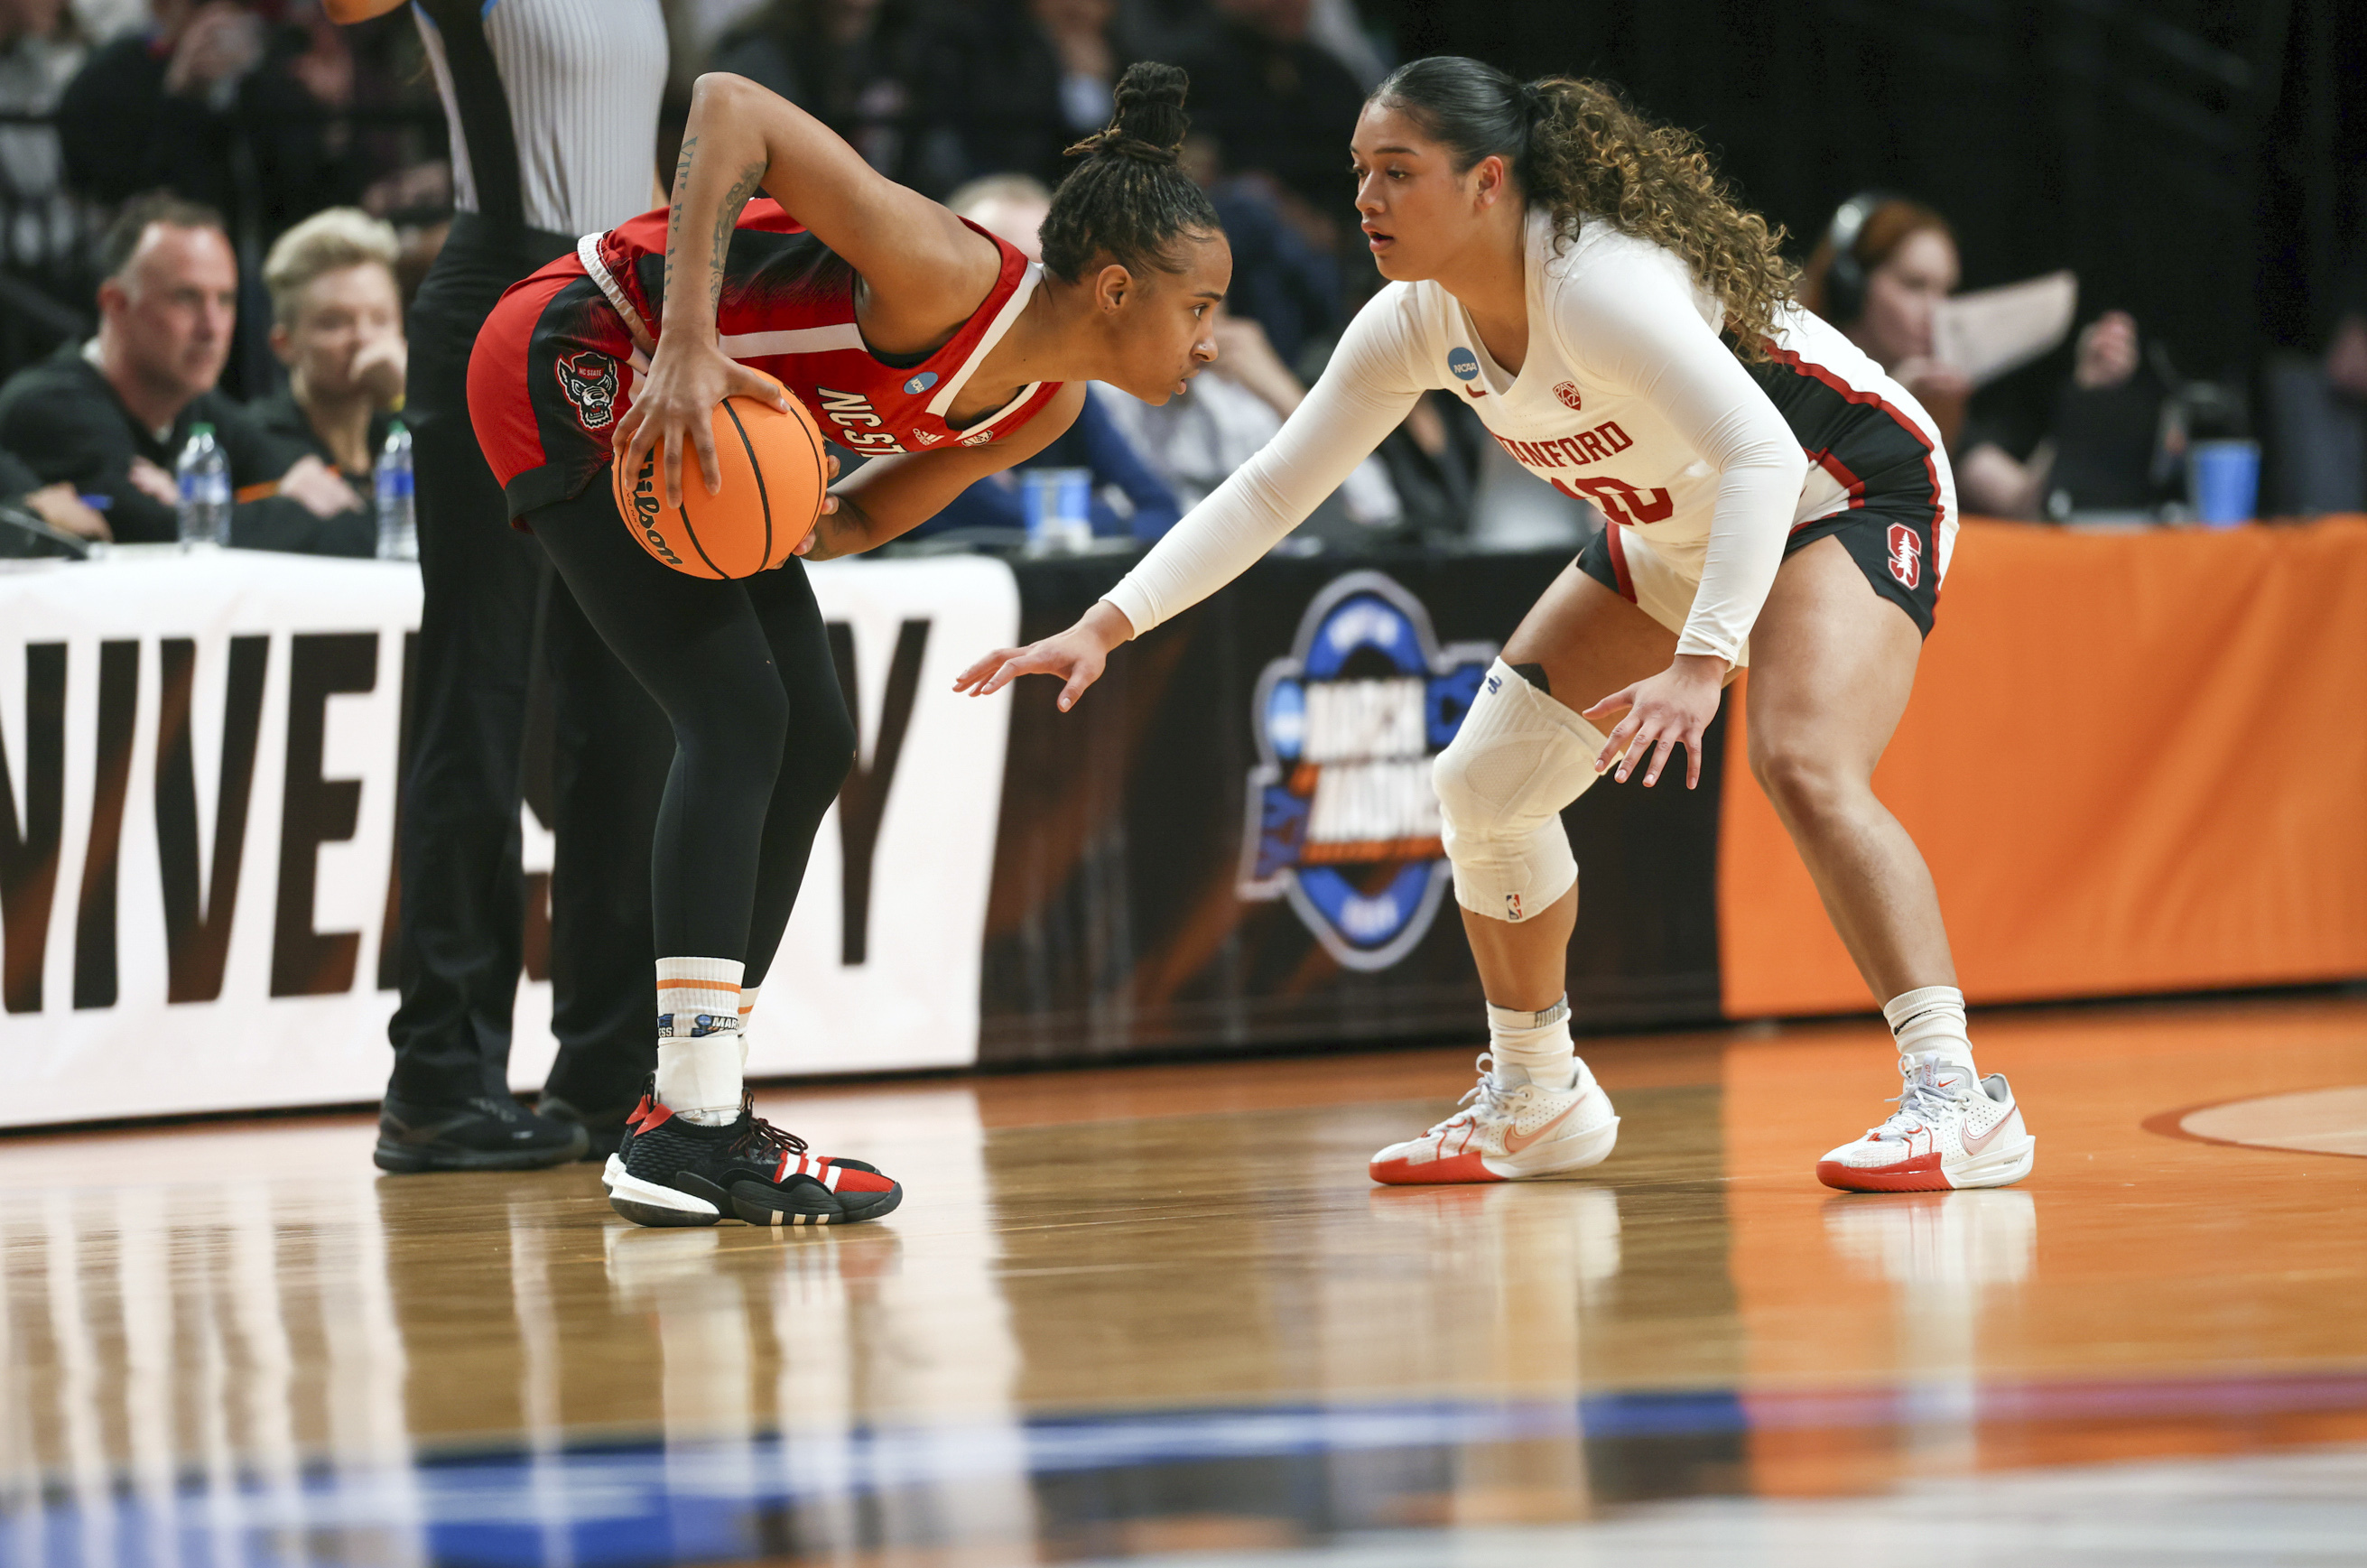 Aziaha James scores 29 to lead N.C. State into the women’s Elite Eight